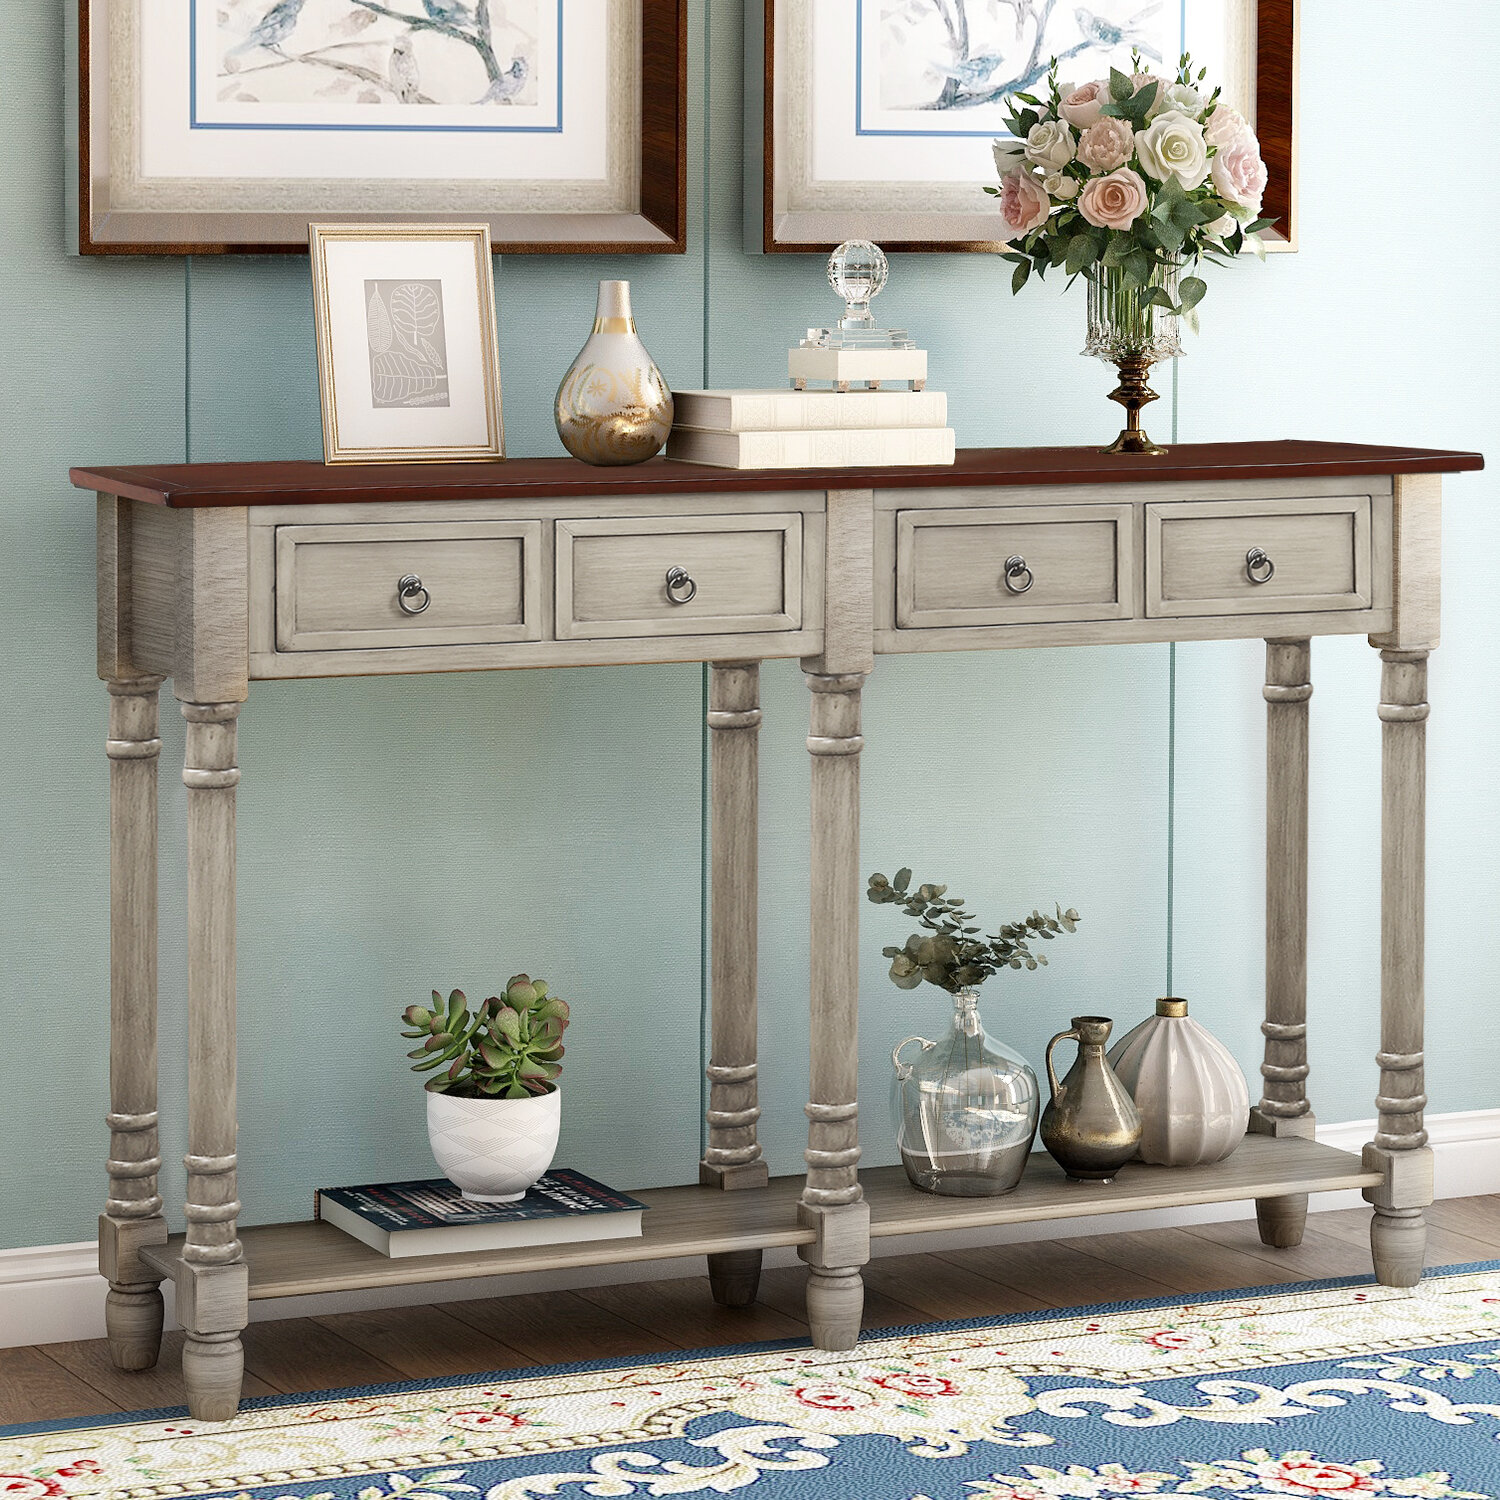 Details about   Console Table Hall table Side Table 3 Drawers Entryway Desk Accent Table  White 